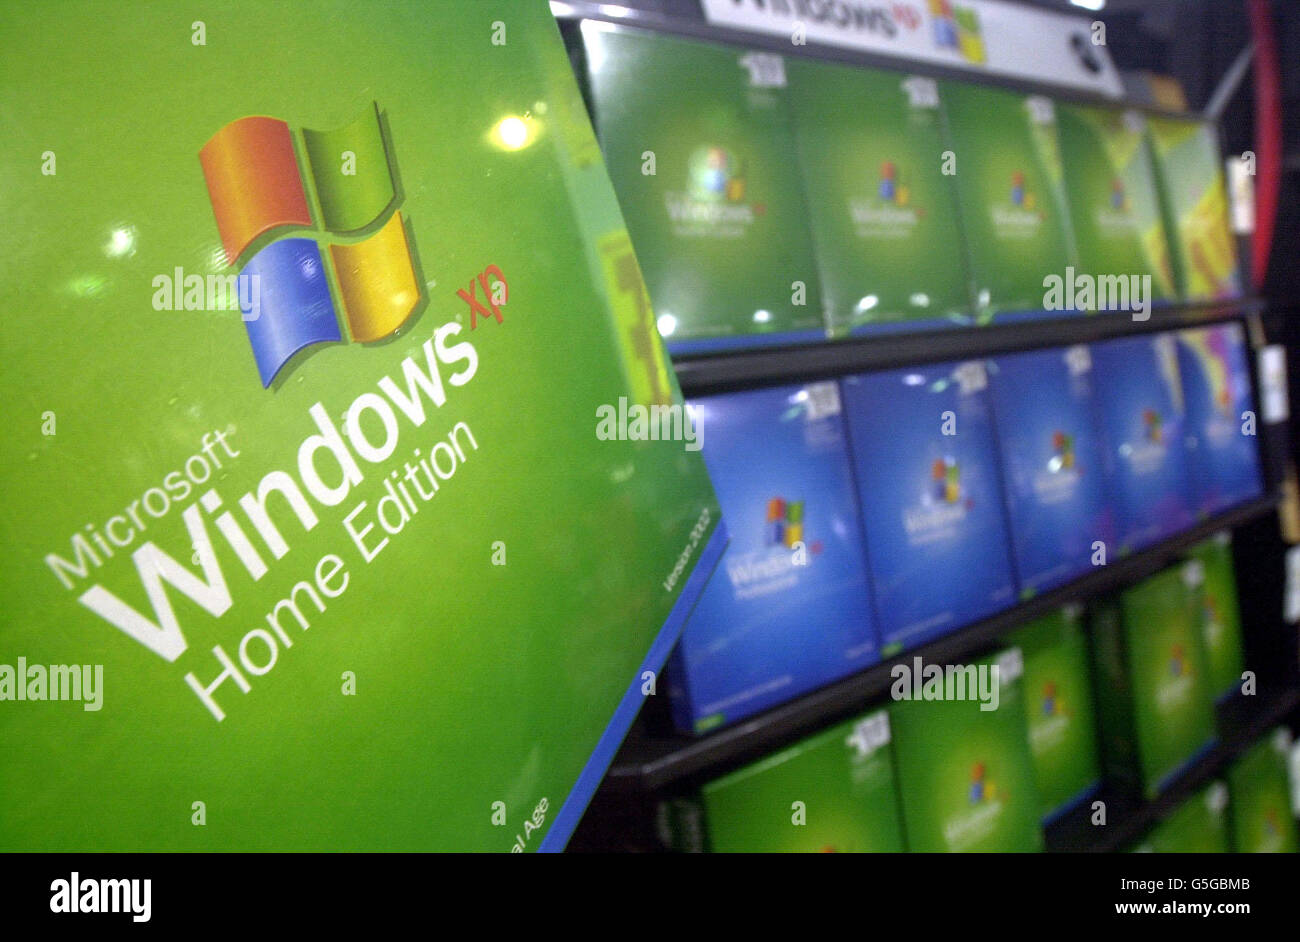 A copy of Windows XP Home Edition in front of the main display at London's HMV Oxford Street record shop. The package is an update for the popular operating software which has been launched by Microsoft world-wide. Stock Photo